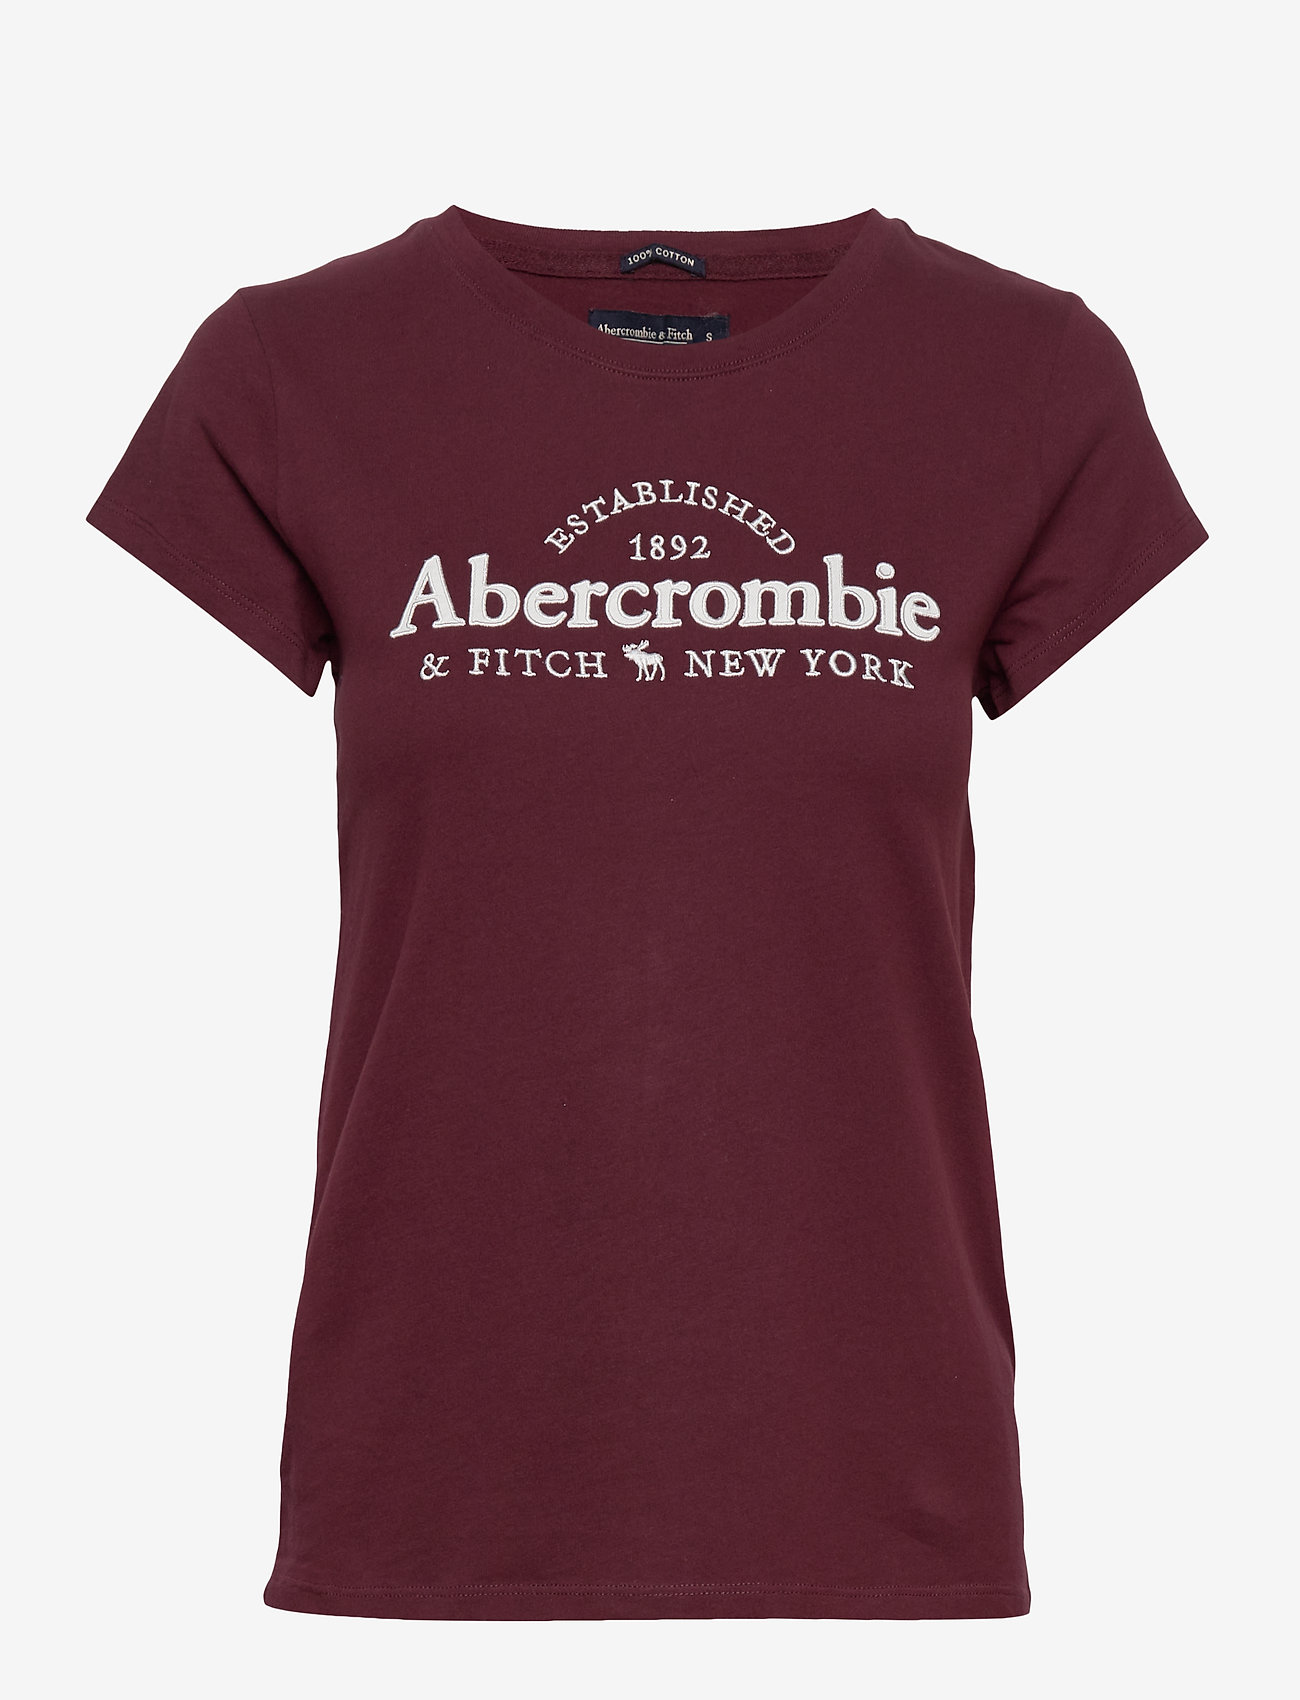 abercrombie and fitch logo t shirt